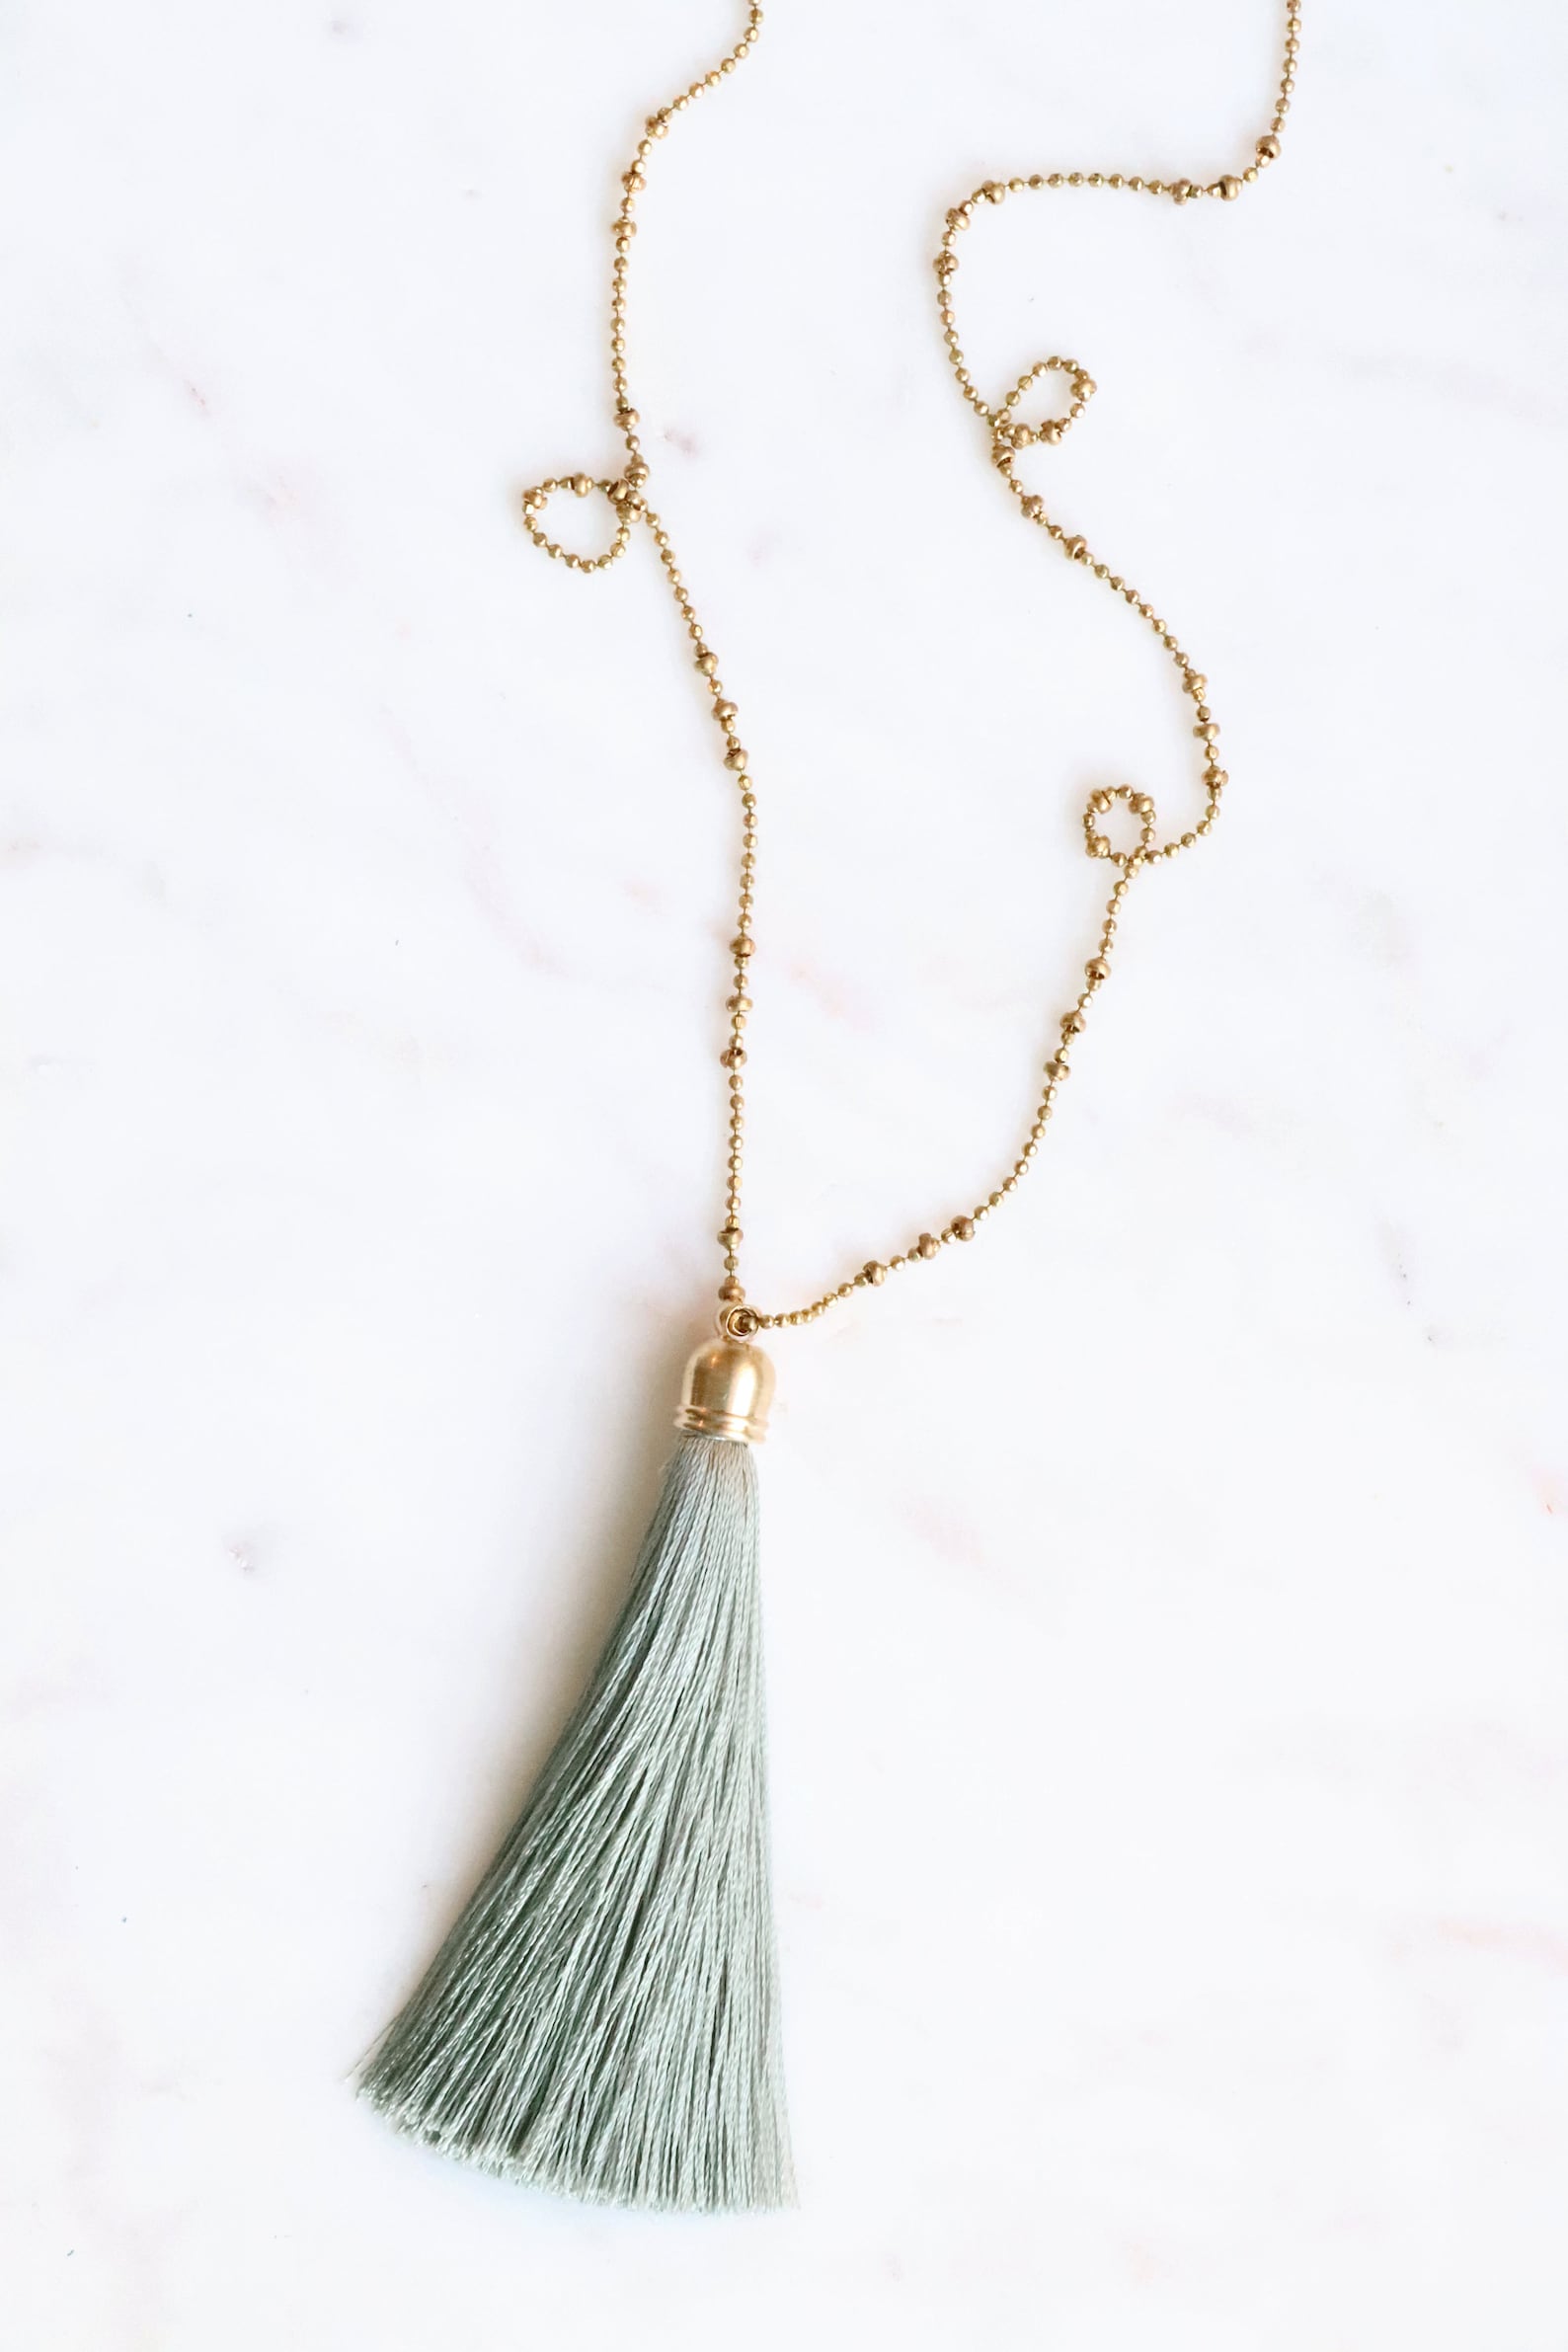 Lovely golden tassel necklace! Pair it with a top in ivory to make a chic look.